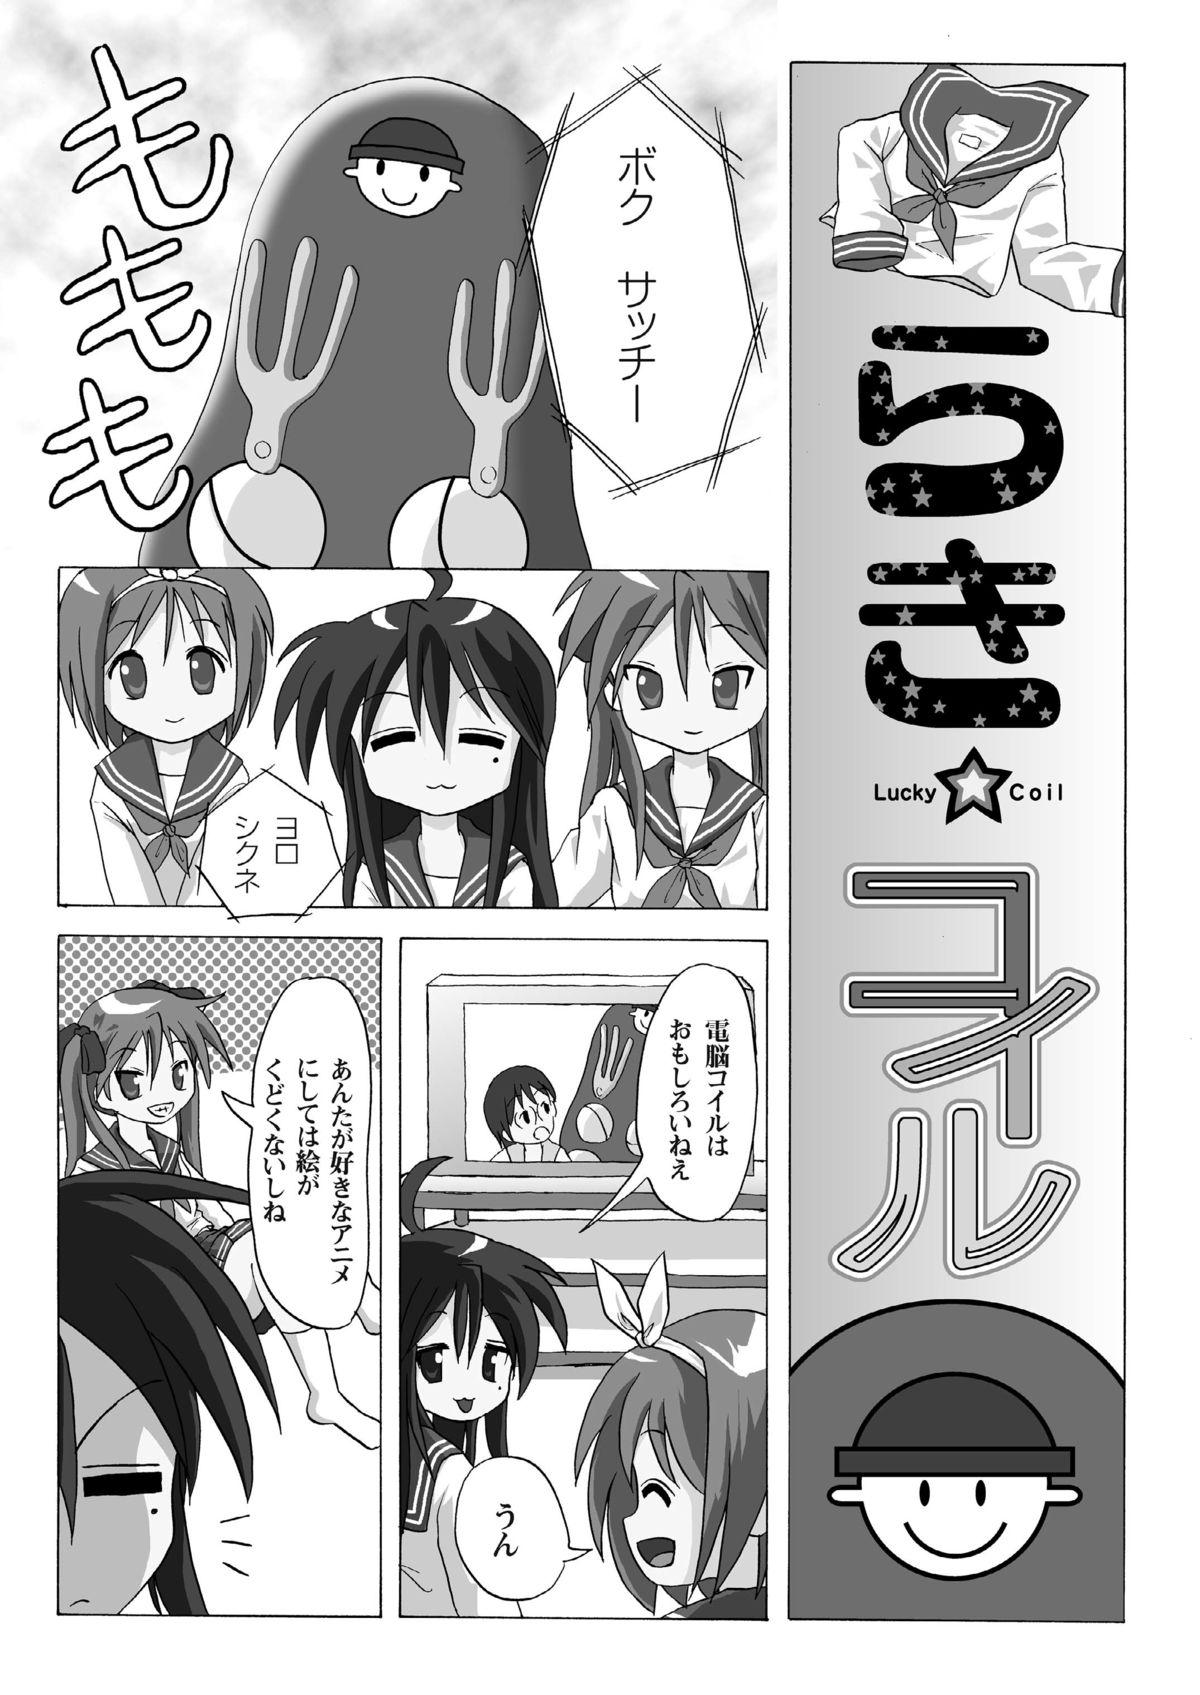 Long Lucky Coil - Lucky star Dennou coil Rola - Page 3